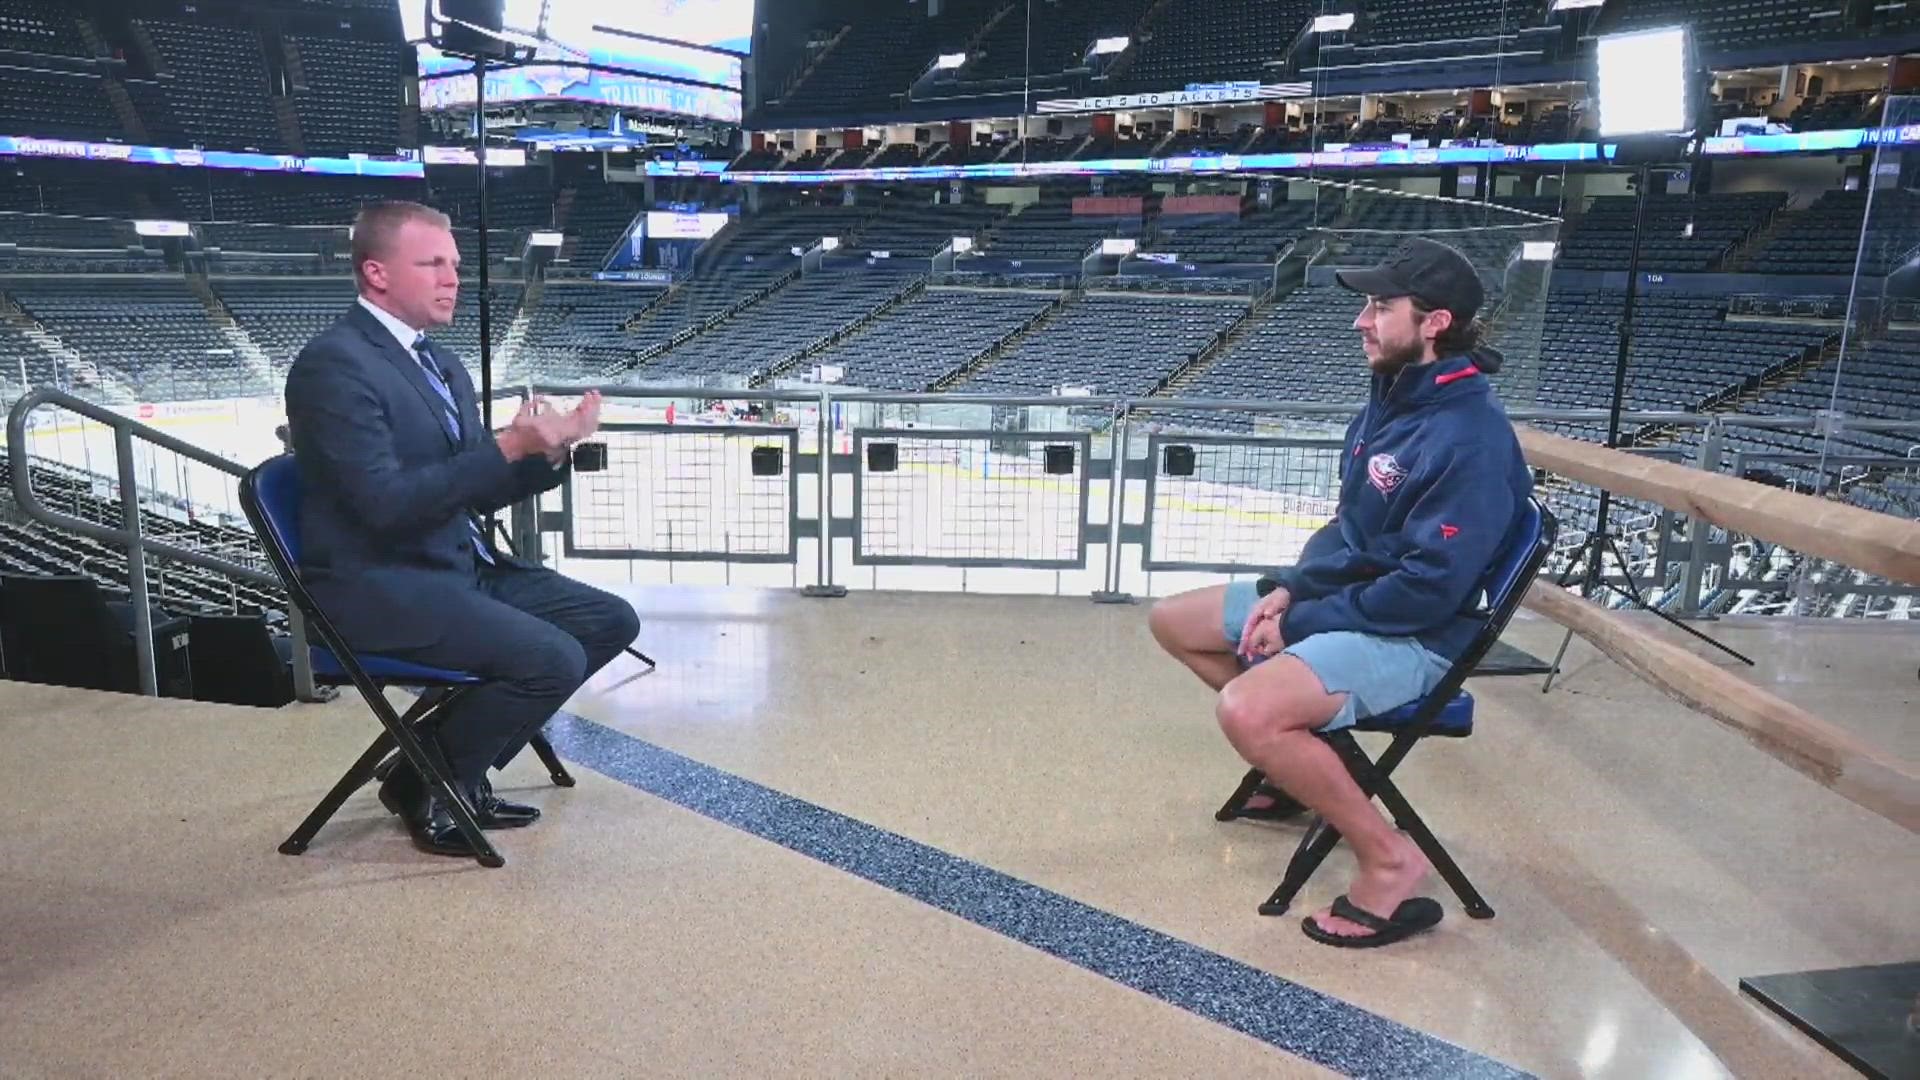 Before the Blue Jackets open the season, 10TV'S Dave Holmes had a chance to talk to the biggest free agent signing in franchise history: Johnny Gaudreau.